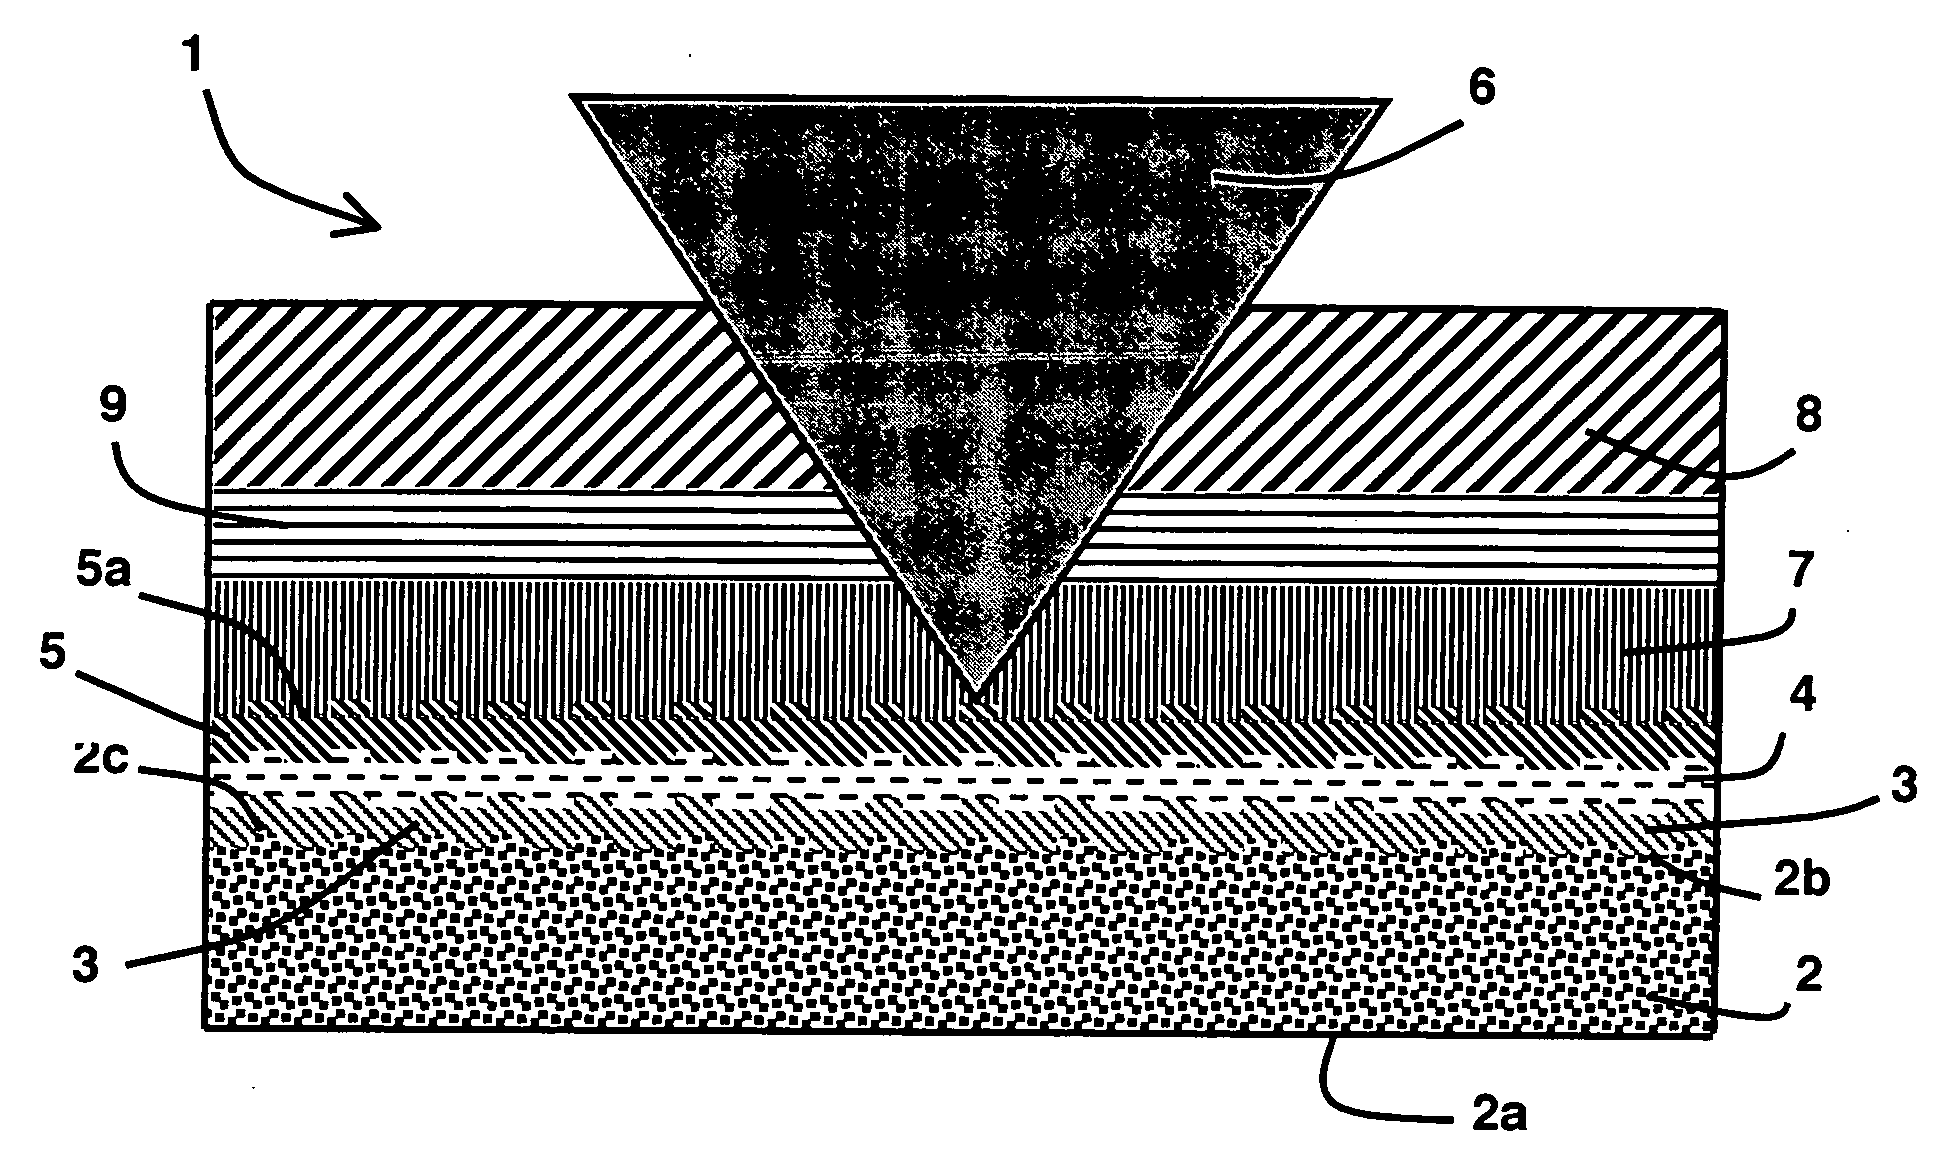 Optical data recording medium provided with at least one photosensitive layer and one deformable layer